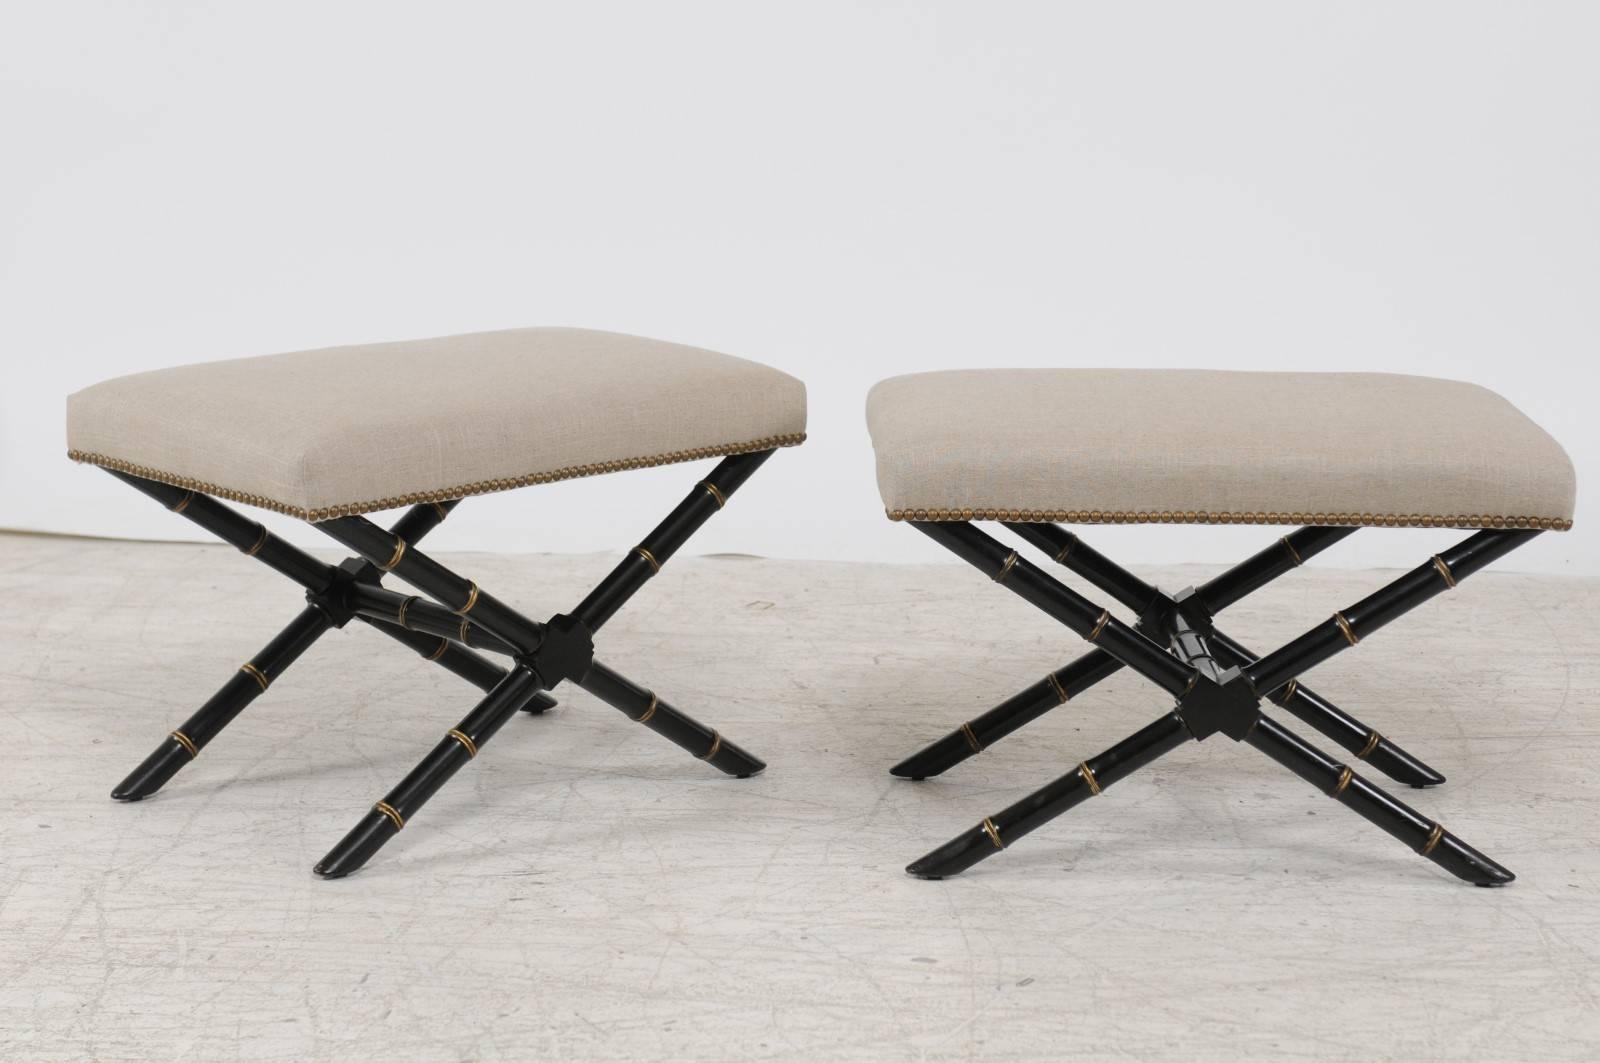 A pair of French ebonized wood faux-bamboo X-frame stools from the mid-20th century with newly upholstered seats. Each of this pair of French stools features a rectangular seat, reupholstered with a simple linen fabric, accented on the trim with